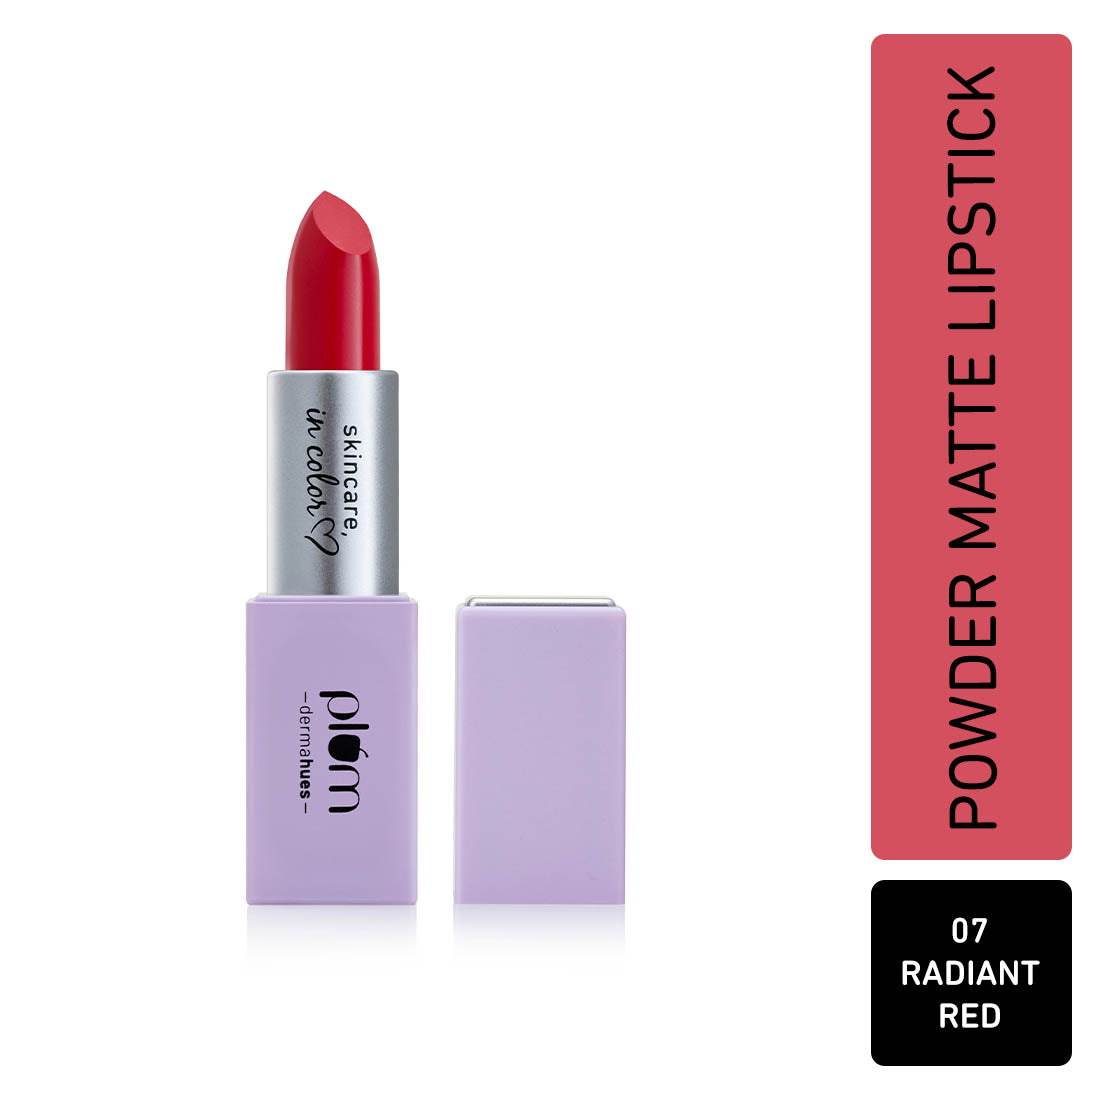 

Plum Velvet Haze Matte Lipstick with SPF 30 | Powder Matte Finish | Highly Pigmented | With Ceramides | 01 Nifty Nude, 07 Radiant Red